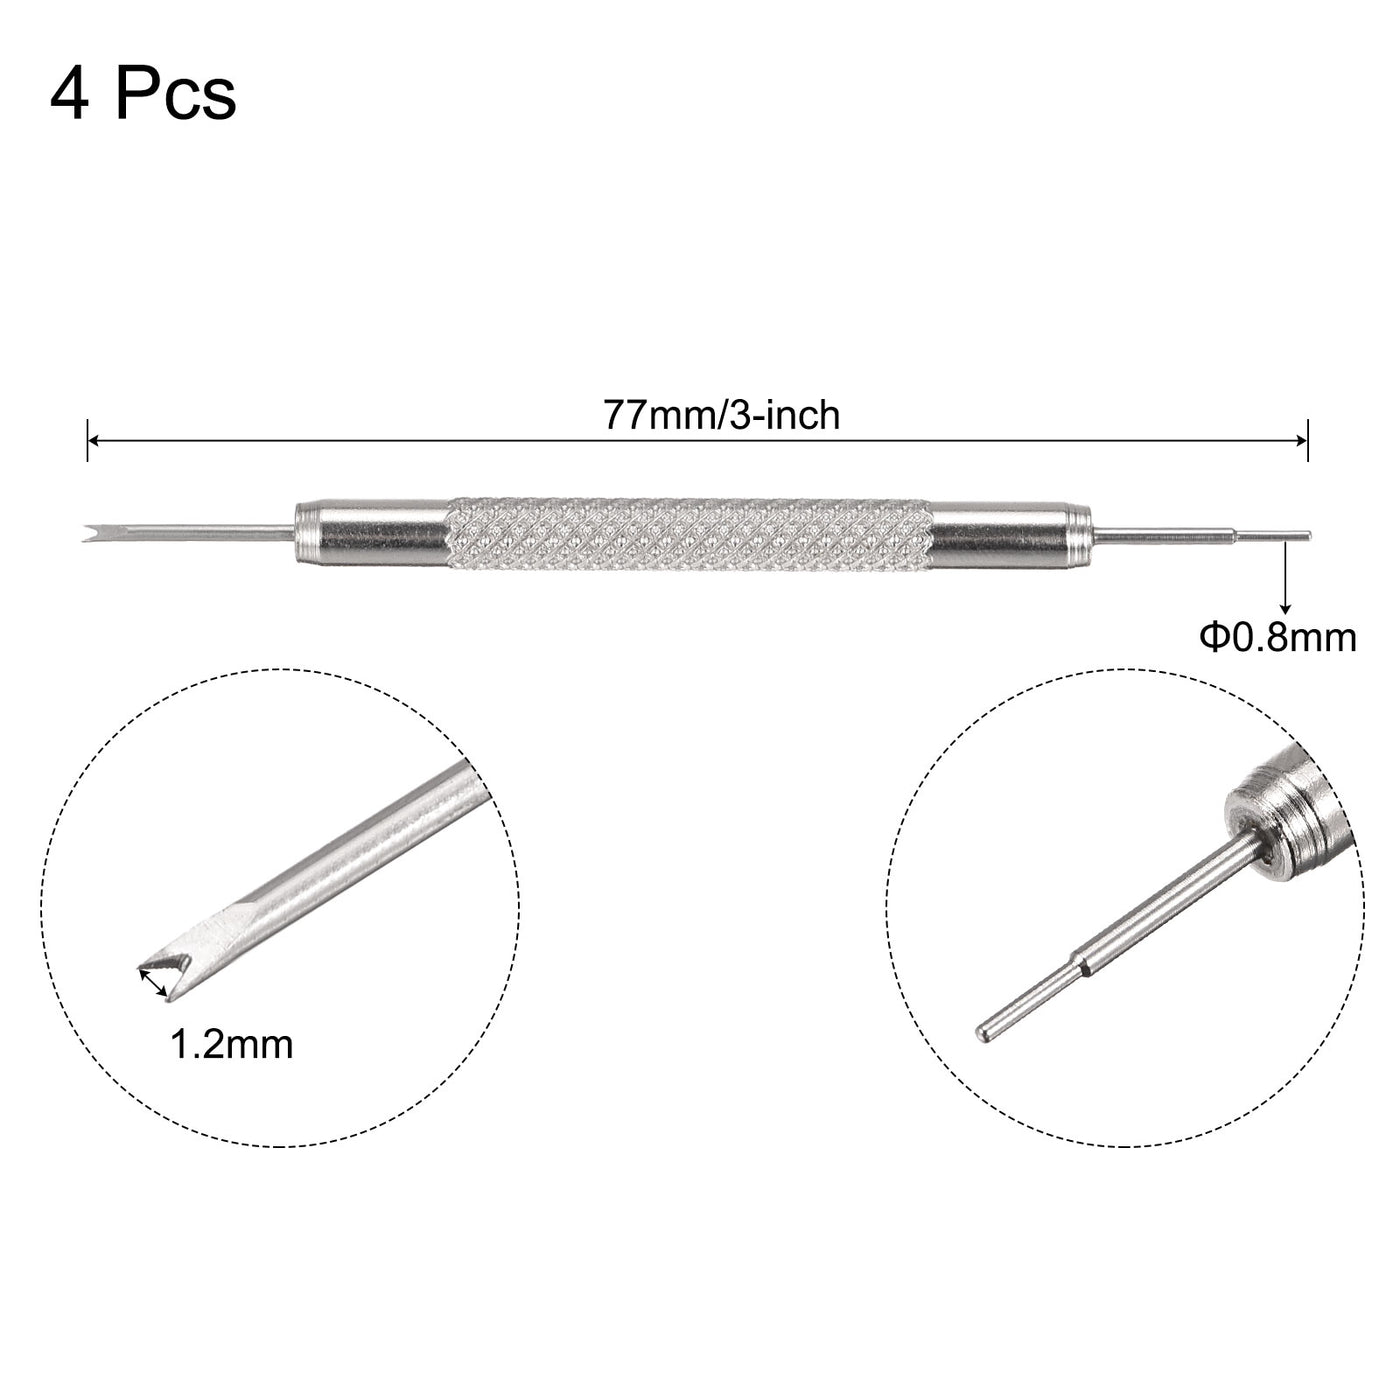 uxcell Uxcell Watch Spring Bar Tool 0.8mm Pin Dia Watch Spring Link Pin Removal Tool for Watch Repair 4 Pcs